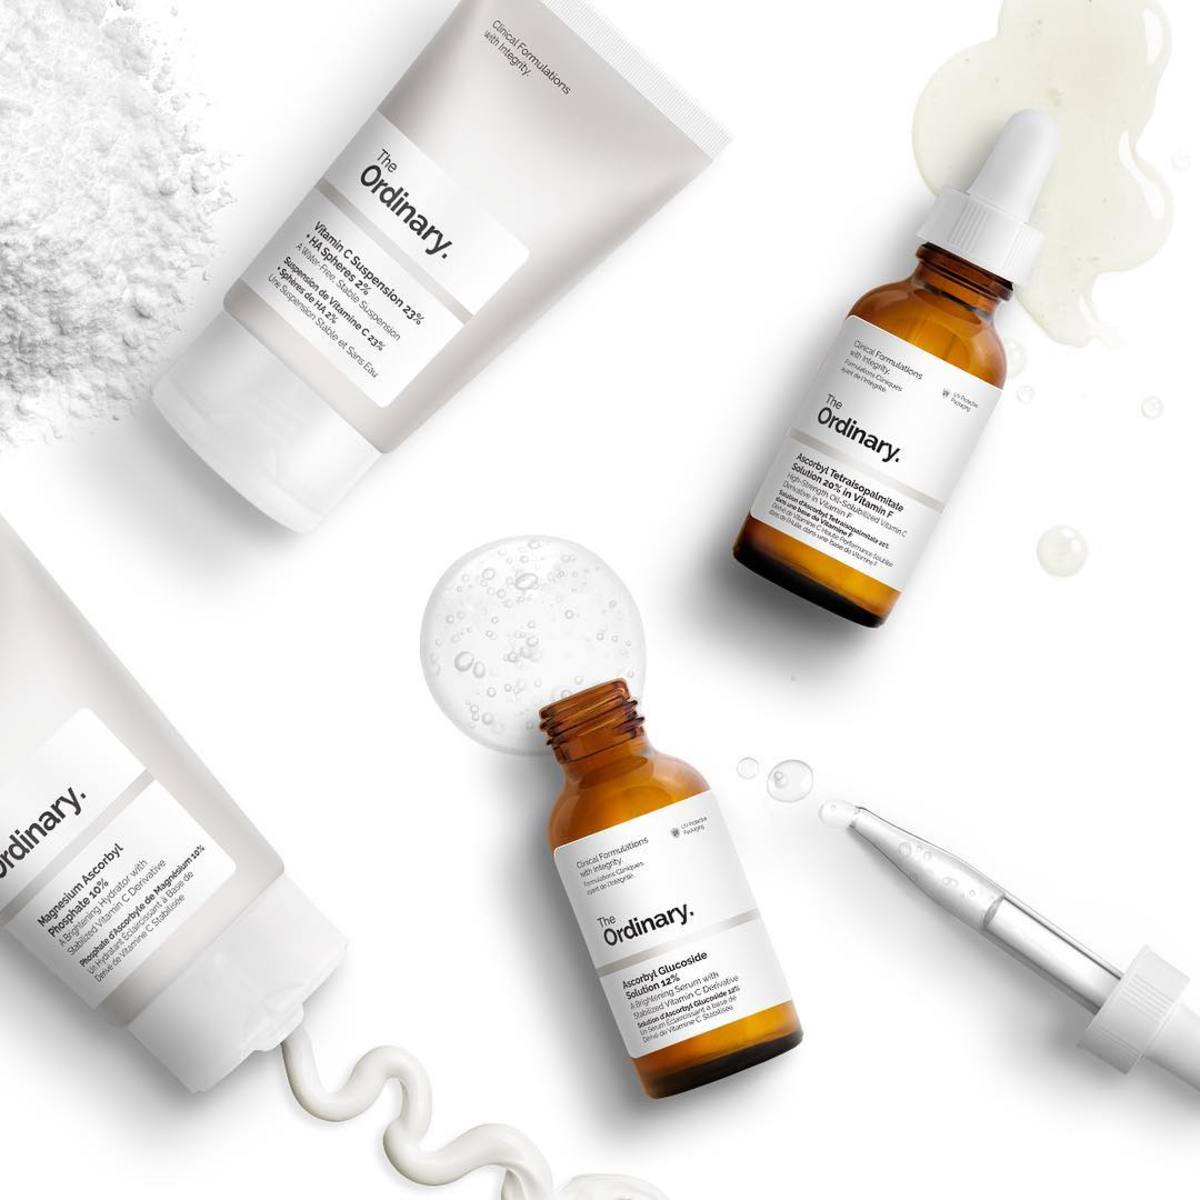 A selection of The Ordinary's products. Photo: @deciem/Instagram